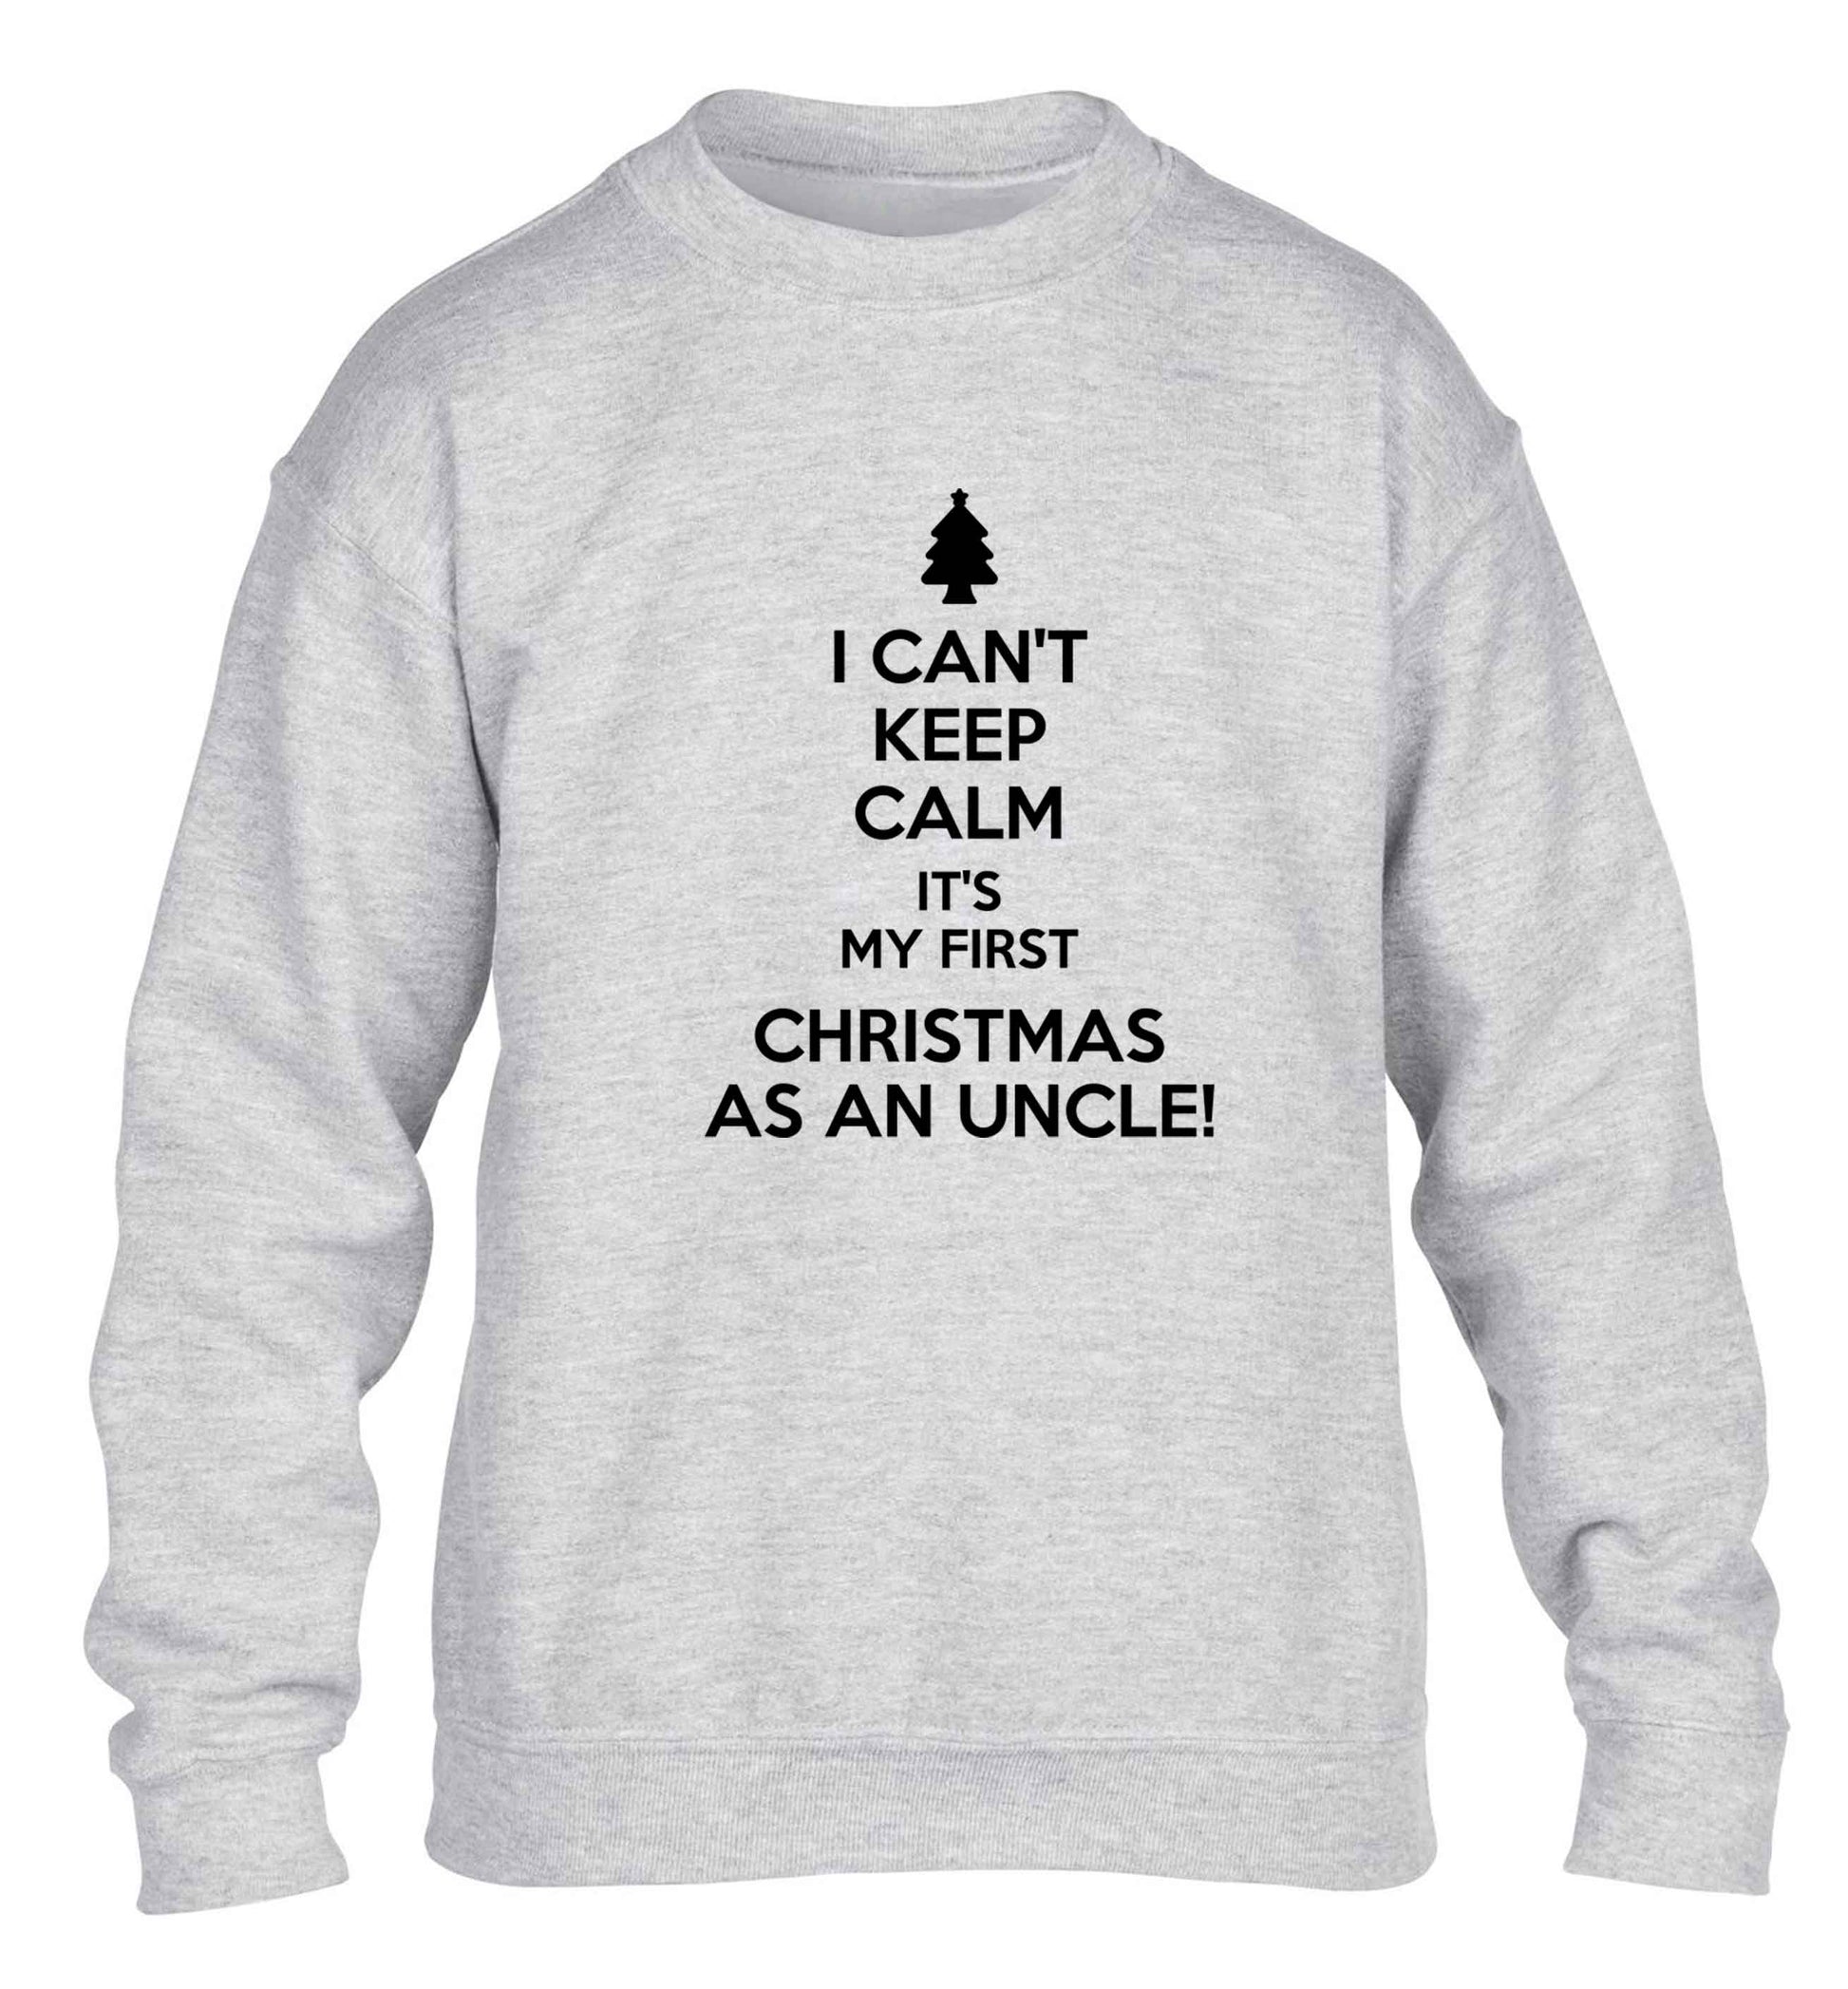 I can't keep calm it's my first Christmas as an uncle! children's grey sweater 12-13 Years